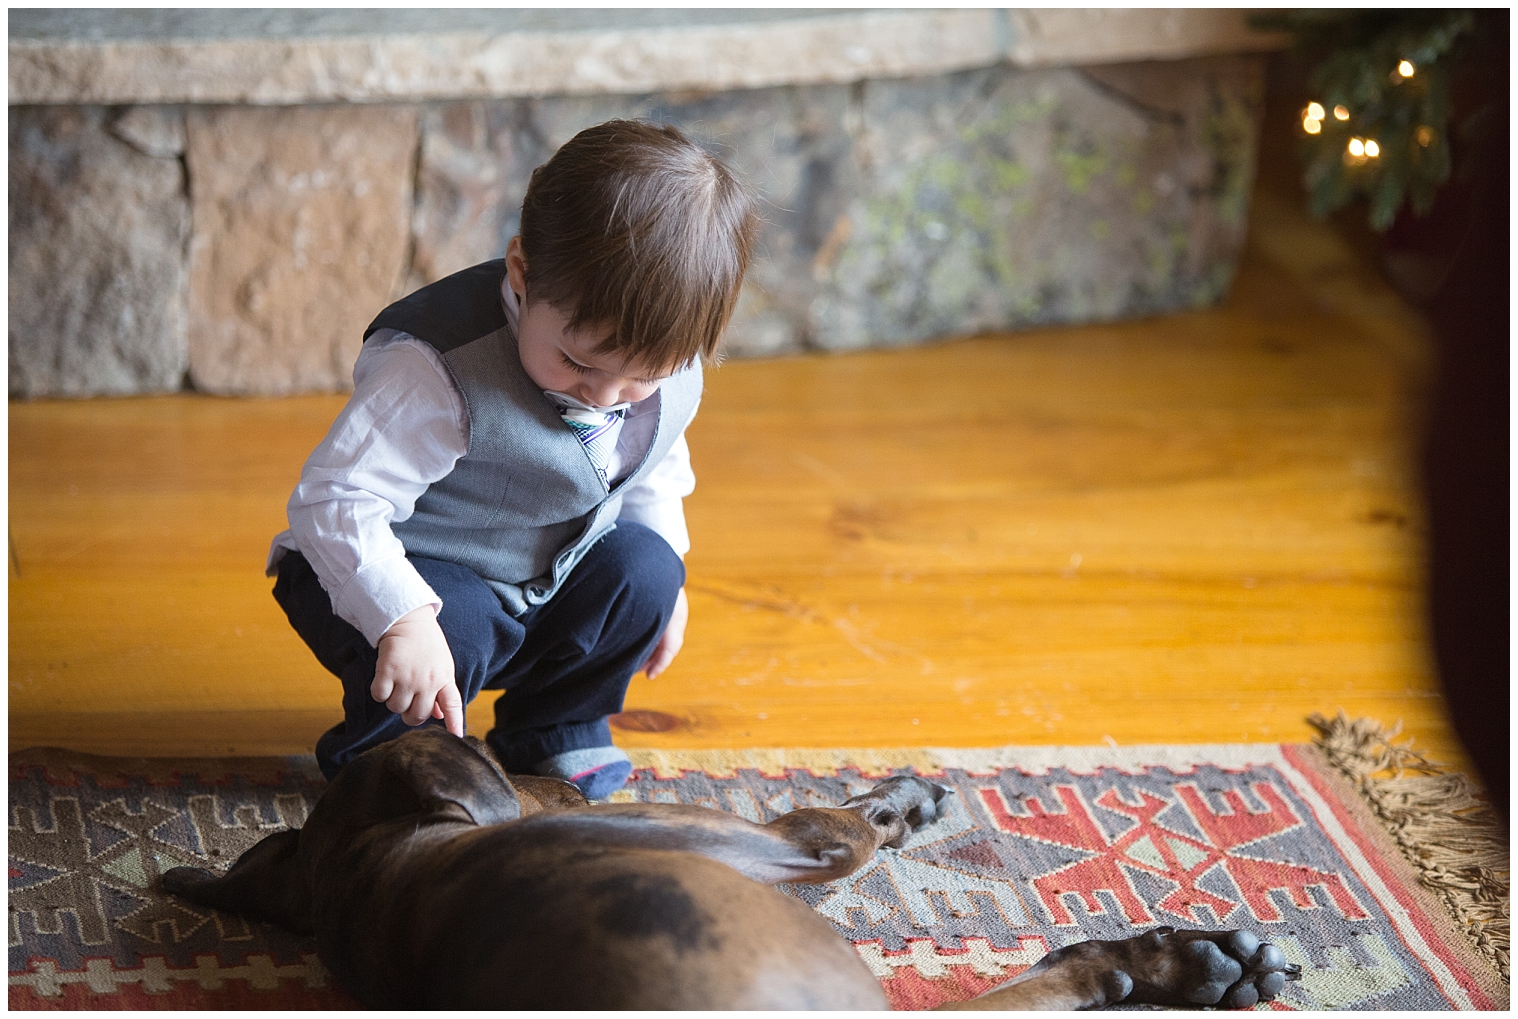 Boy plays with a dog during a Breckenridge elopement ceremony.